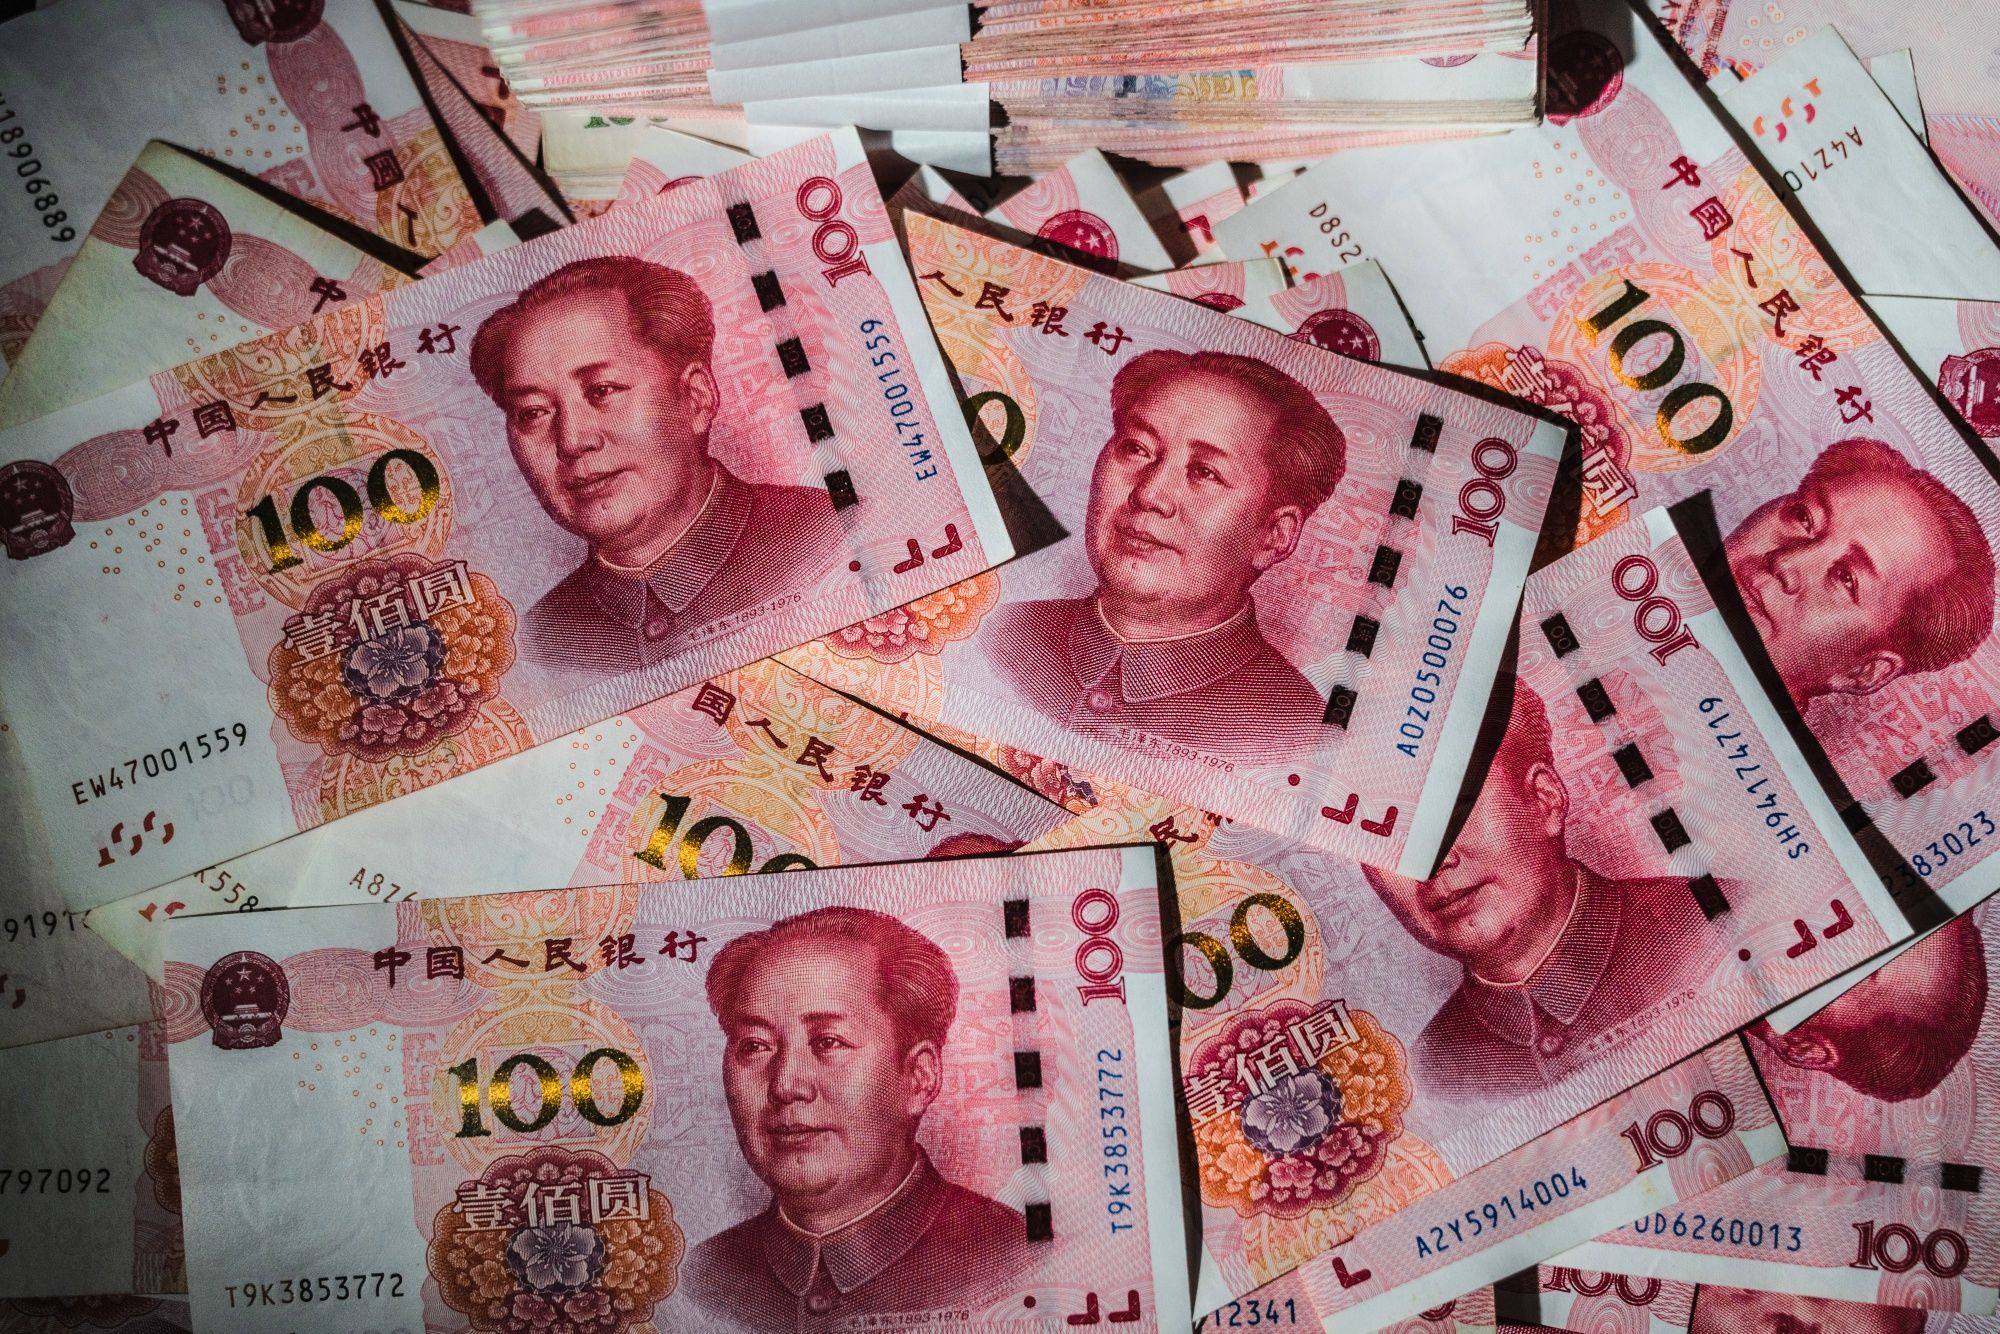 China is making it harder to launder money by more closely monitoring the flow of cash. Photo: Bloomberg